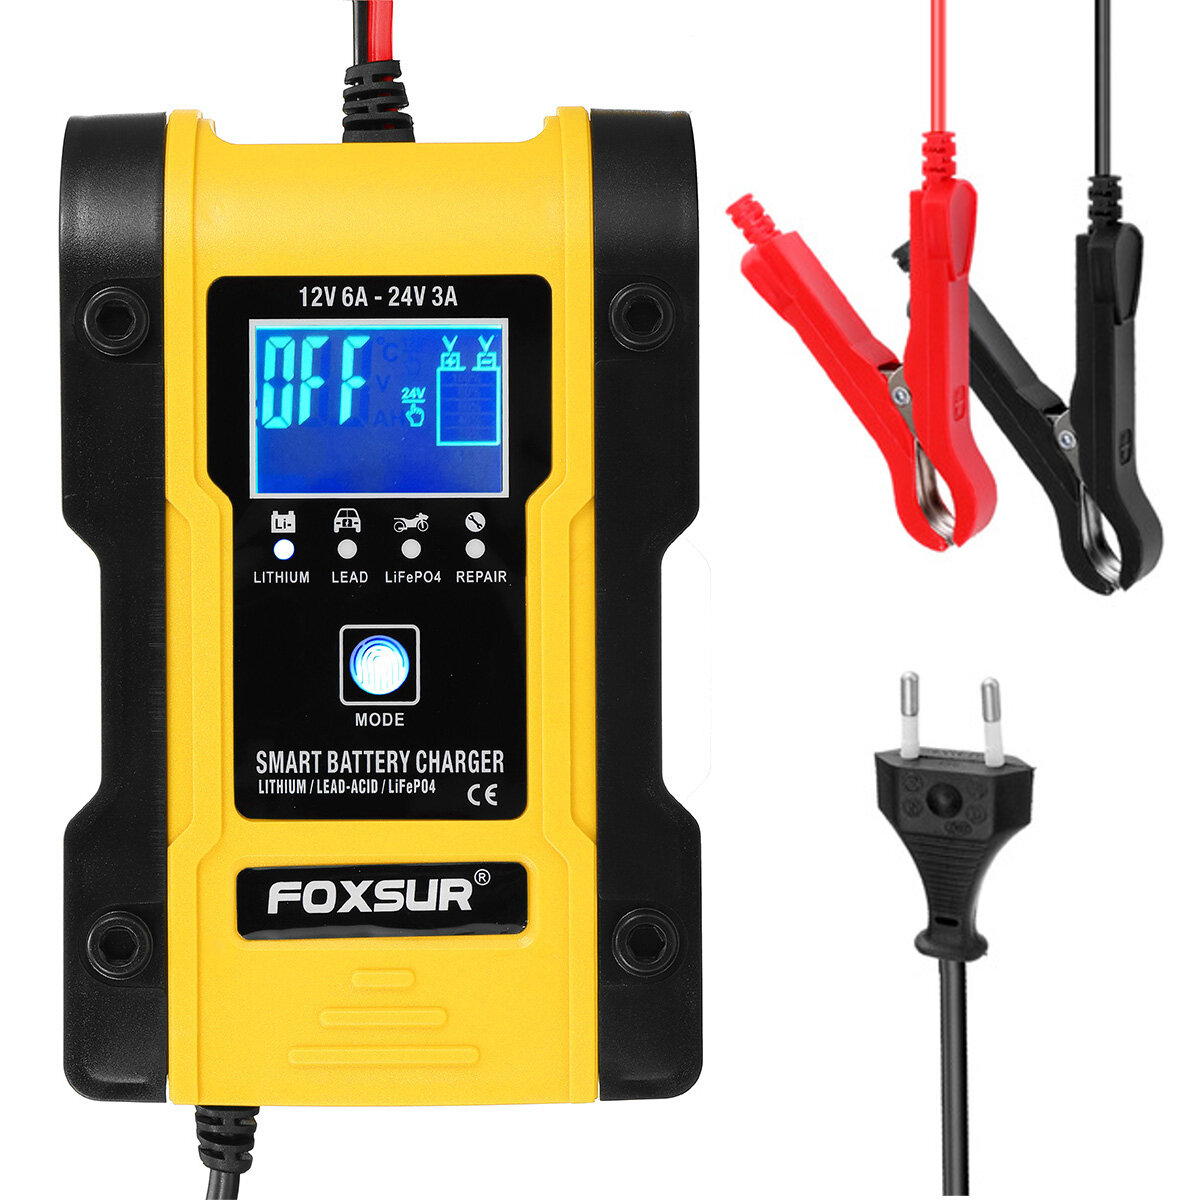 FOXSUR 7-Stages 12V 6A 24V 3A Battery Charger Touch Screen LCD Display Pulse Repair Automatic For Car Motorcycle Electri